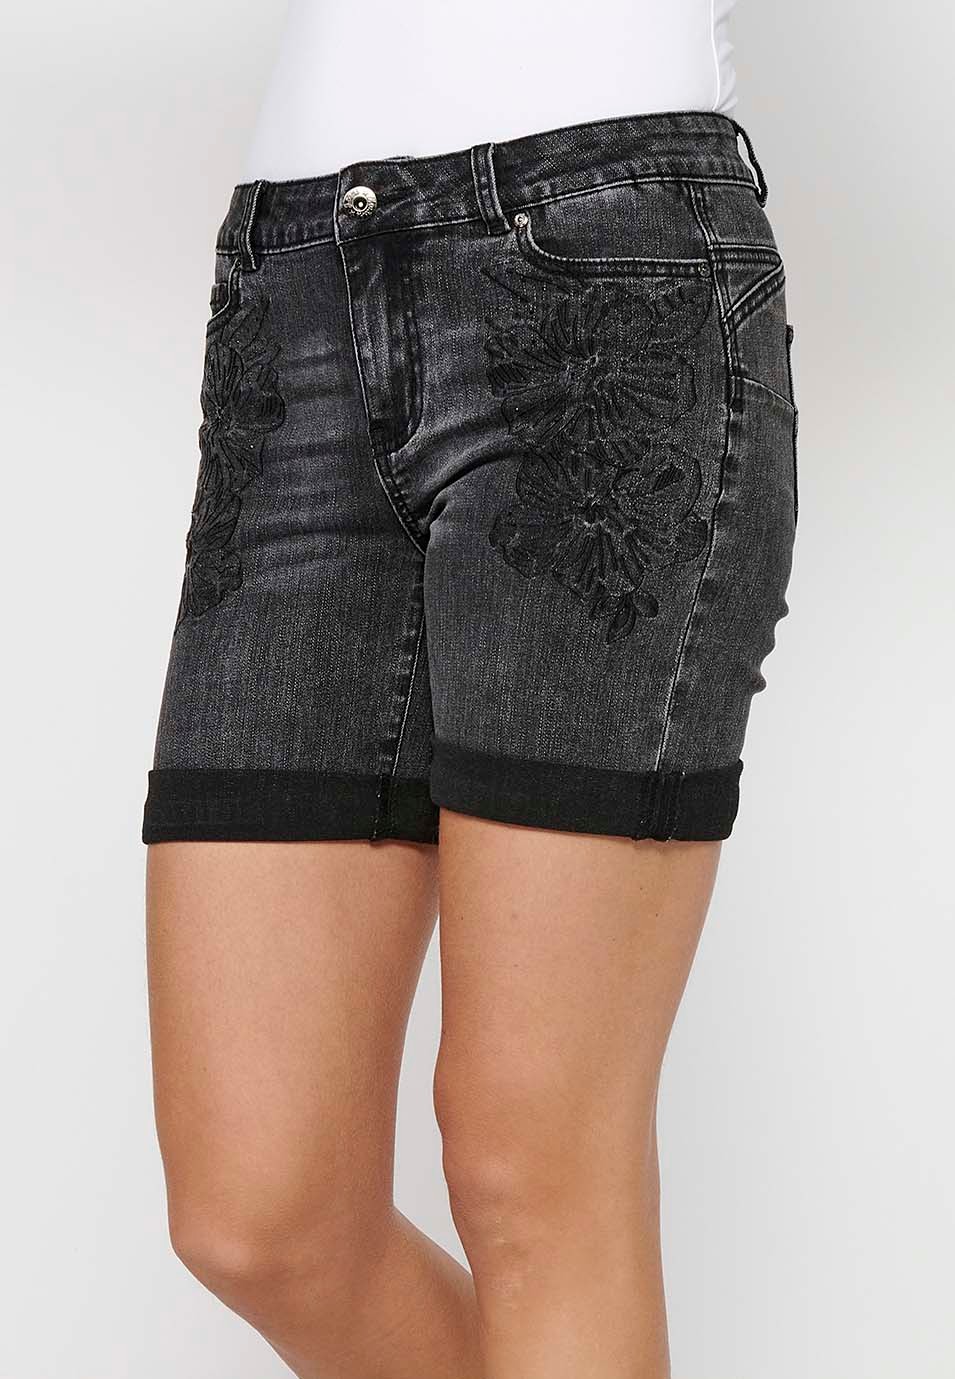 Shorts with a turn-up finish with front closure with zipper and button and floral embroidery in Black for Women 6